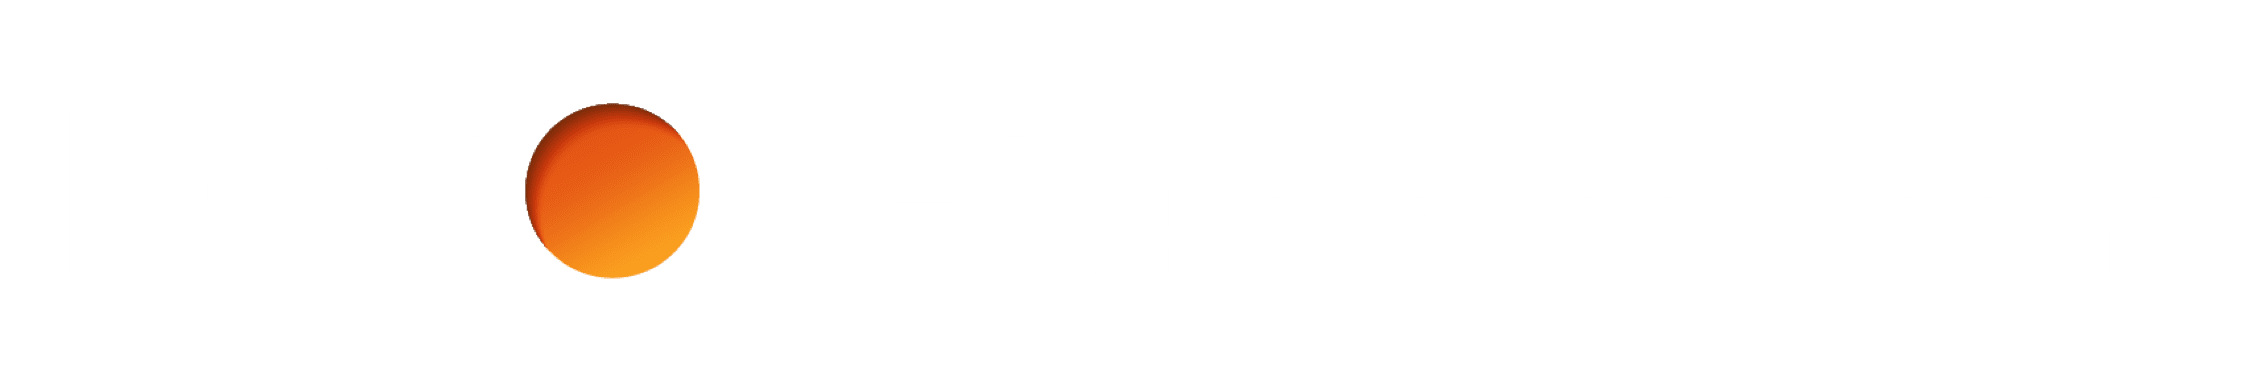 Discover Personal Loans Logo